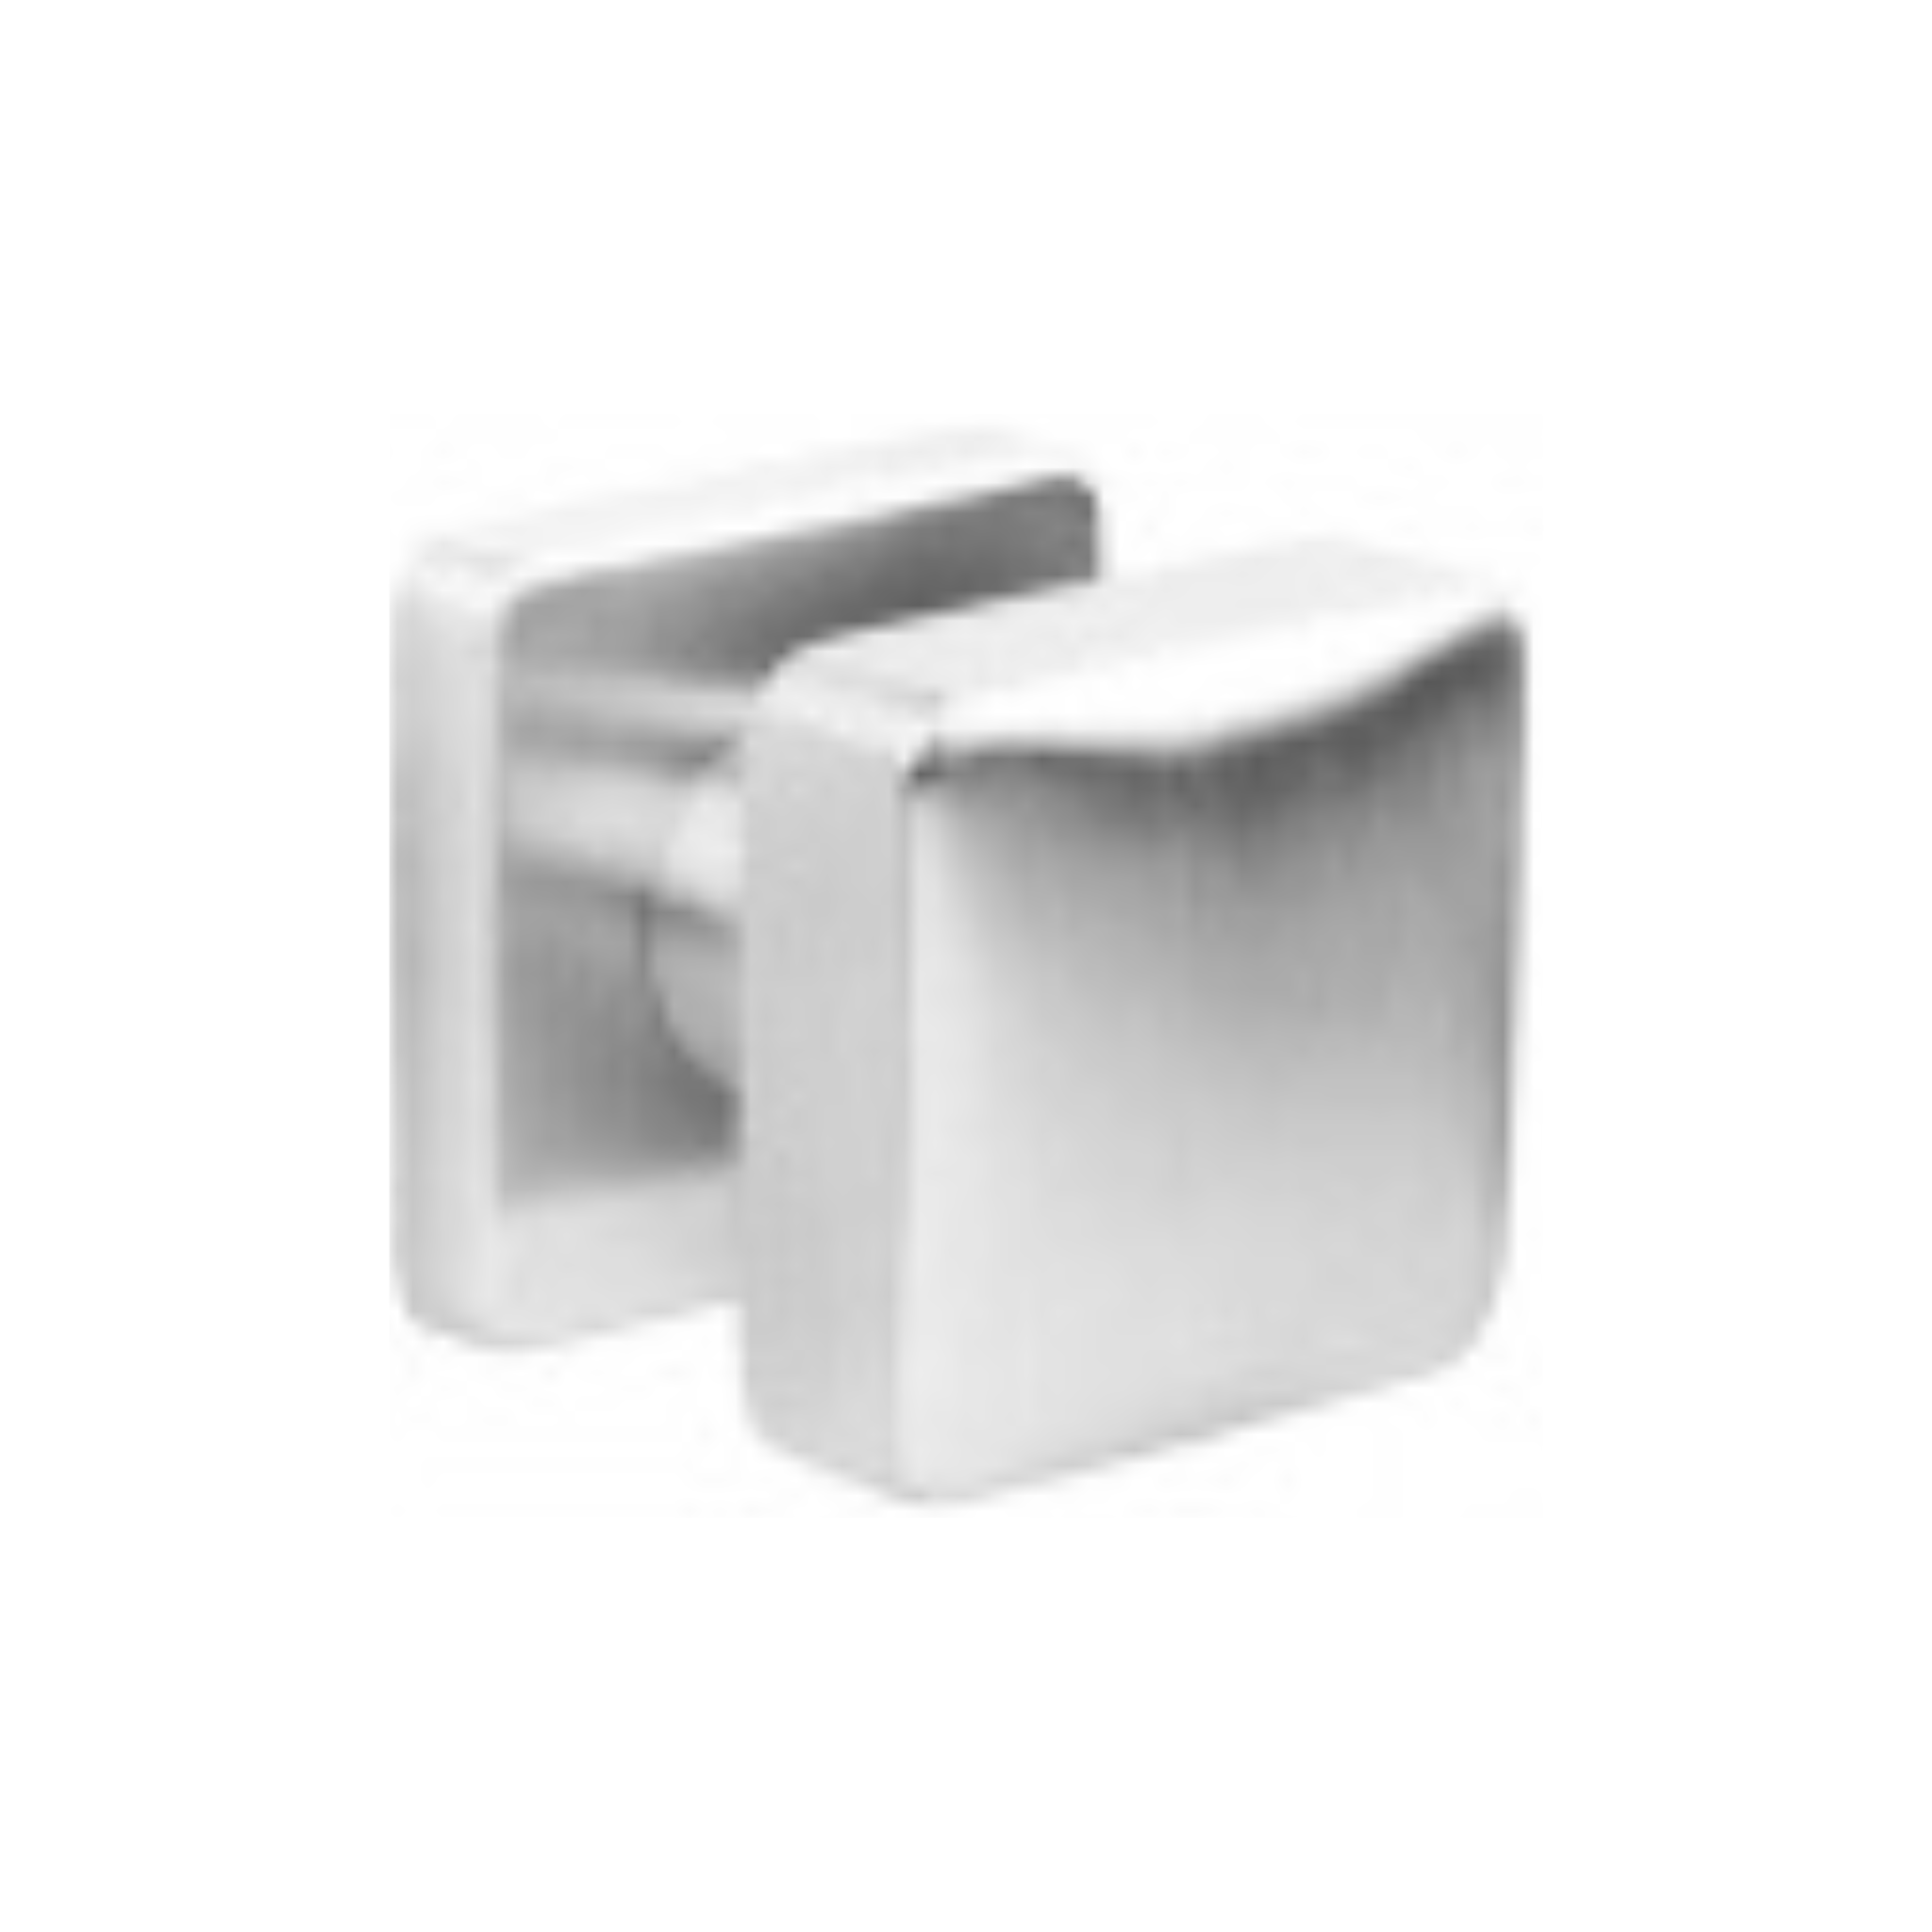 QS3815, Knob Handle, Fixed Square Raised, Stainless Steel, QS